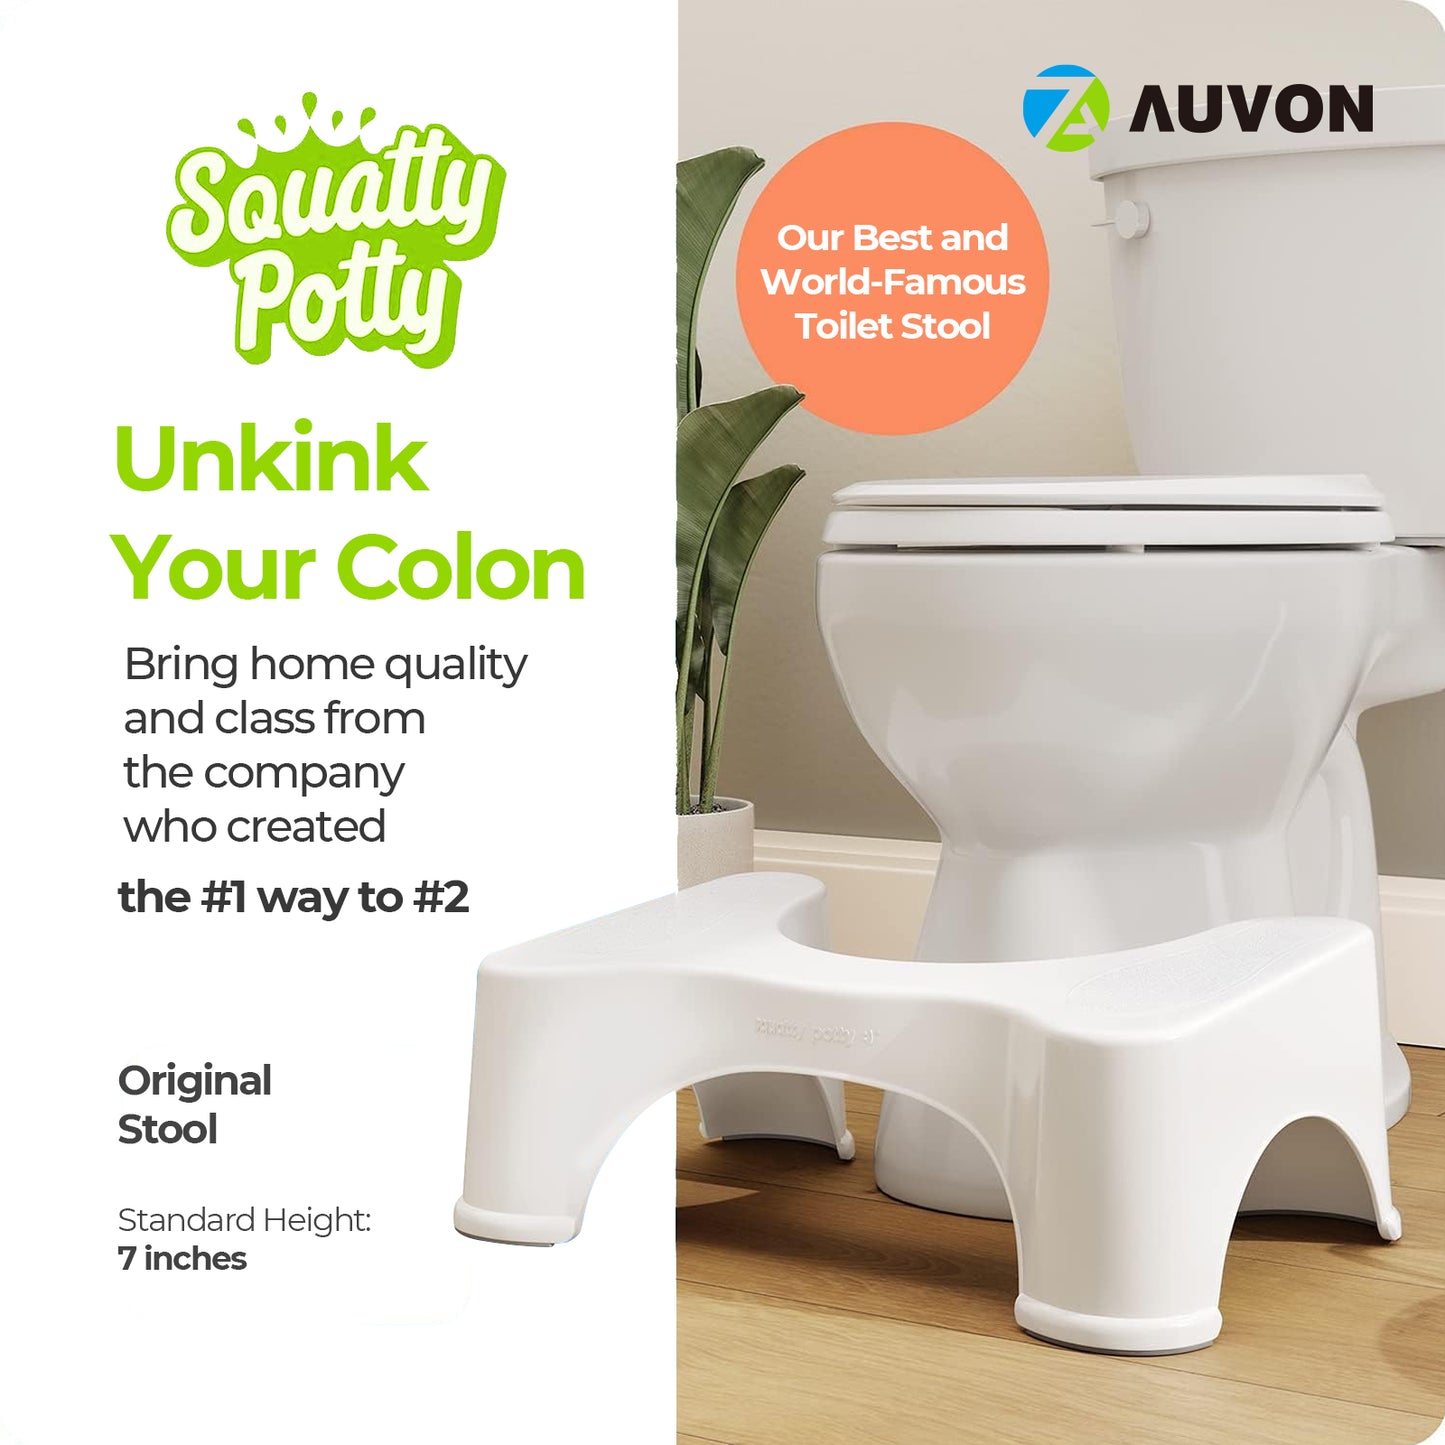 AUVON Toilet Footstool to Place One's Feet on While Sitting on a Toilet, 7 Inch height, White